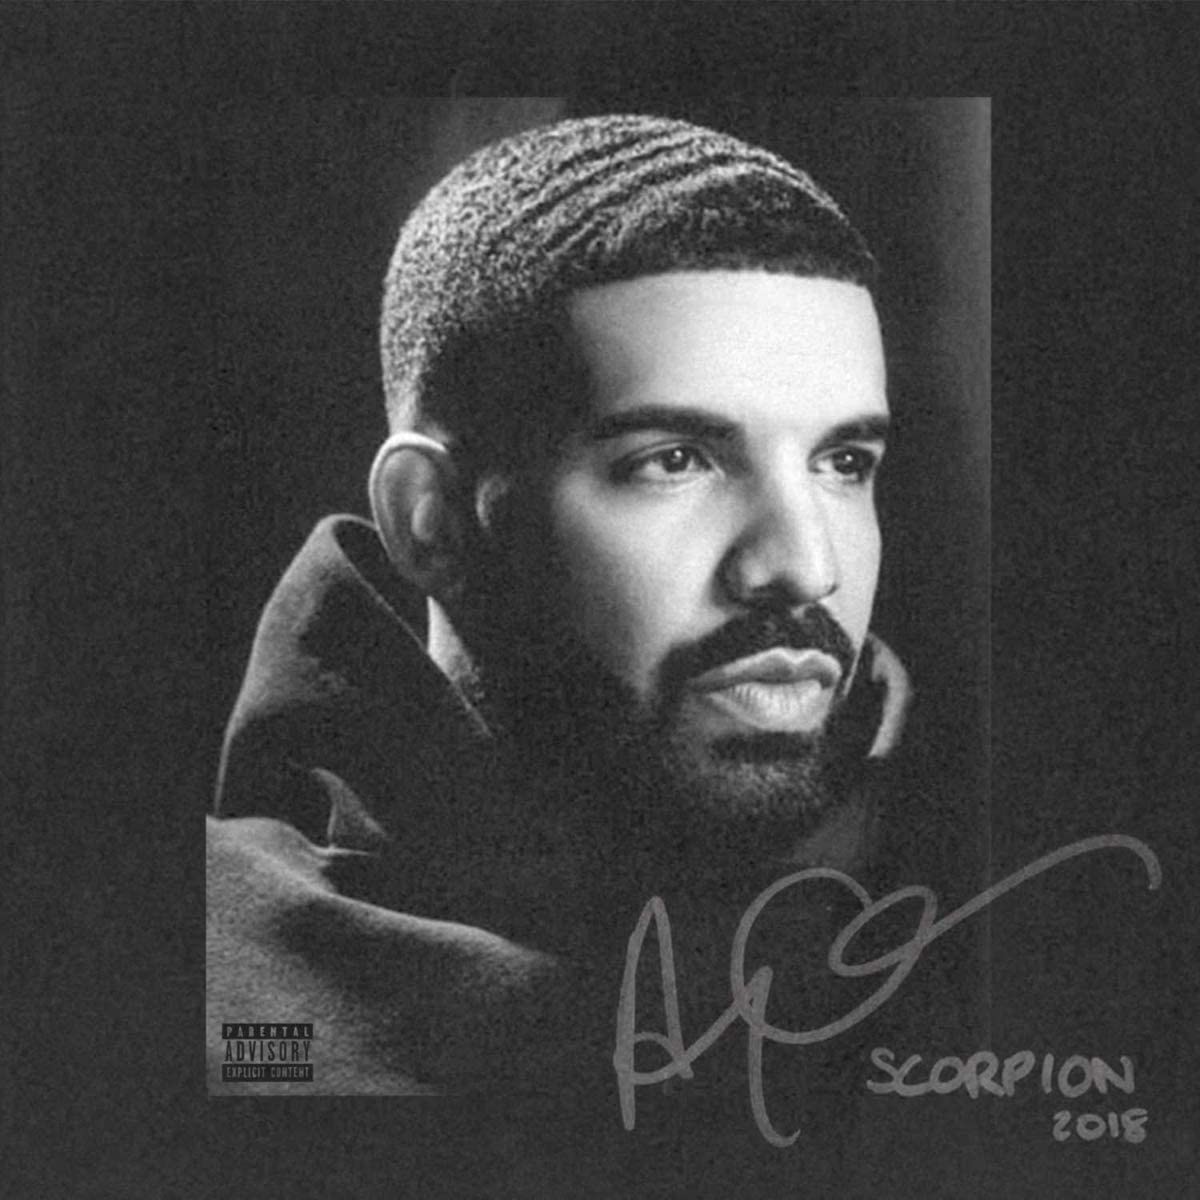 5th studio album on Vinyl by the Canadian hip hop artist. The album features guest appearances from Jay-Z, Ty Dolla $ign and Nicki Minaj, as well as posthumous appearances from Michael Jackson and Static Major. The album includes the singles 'God's Plan' and 'Nice for What'.